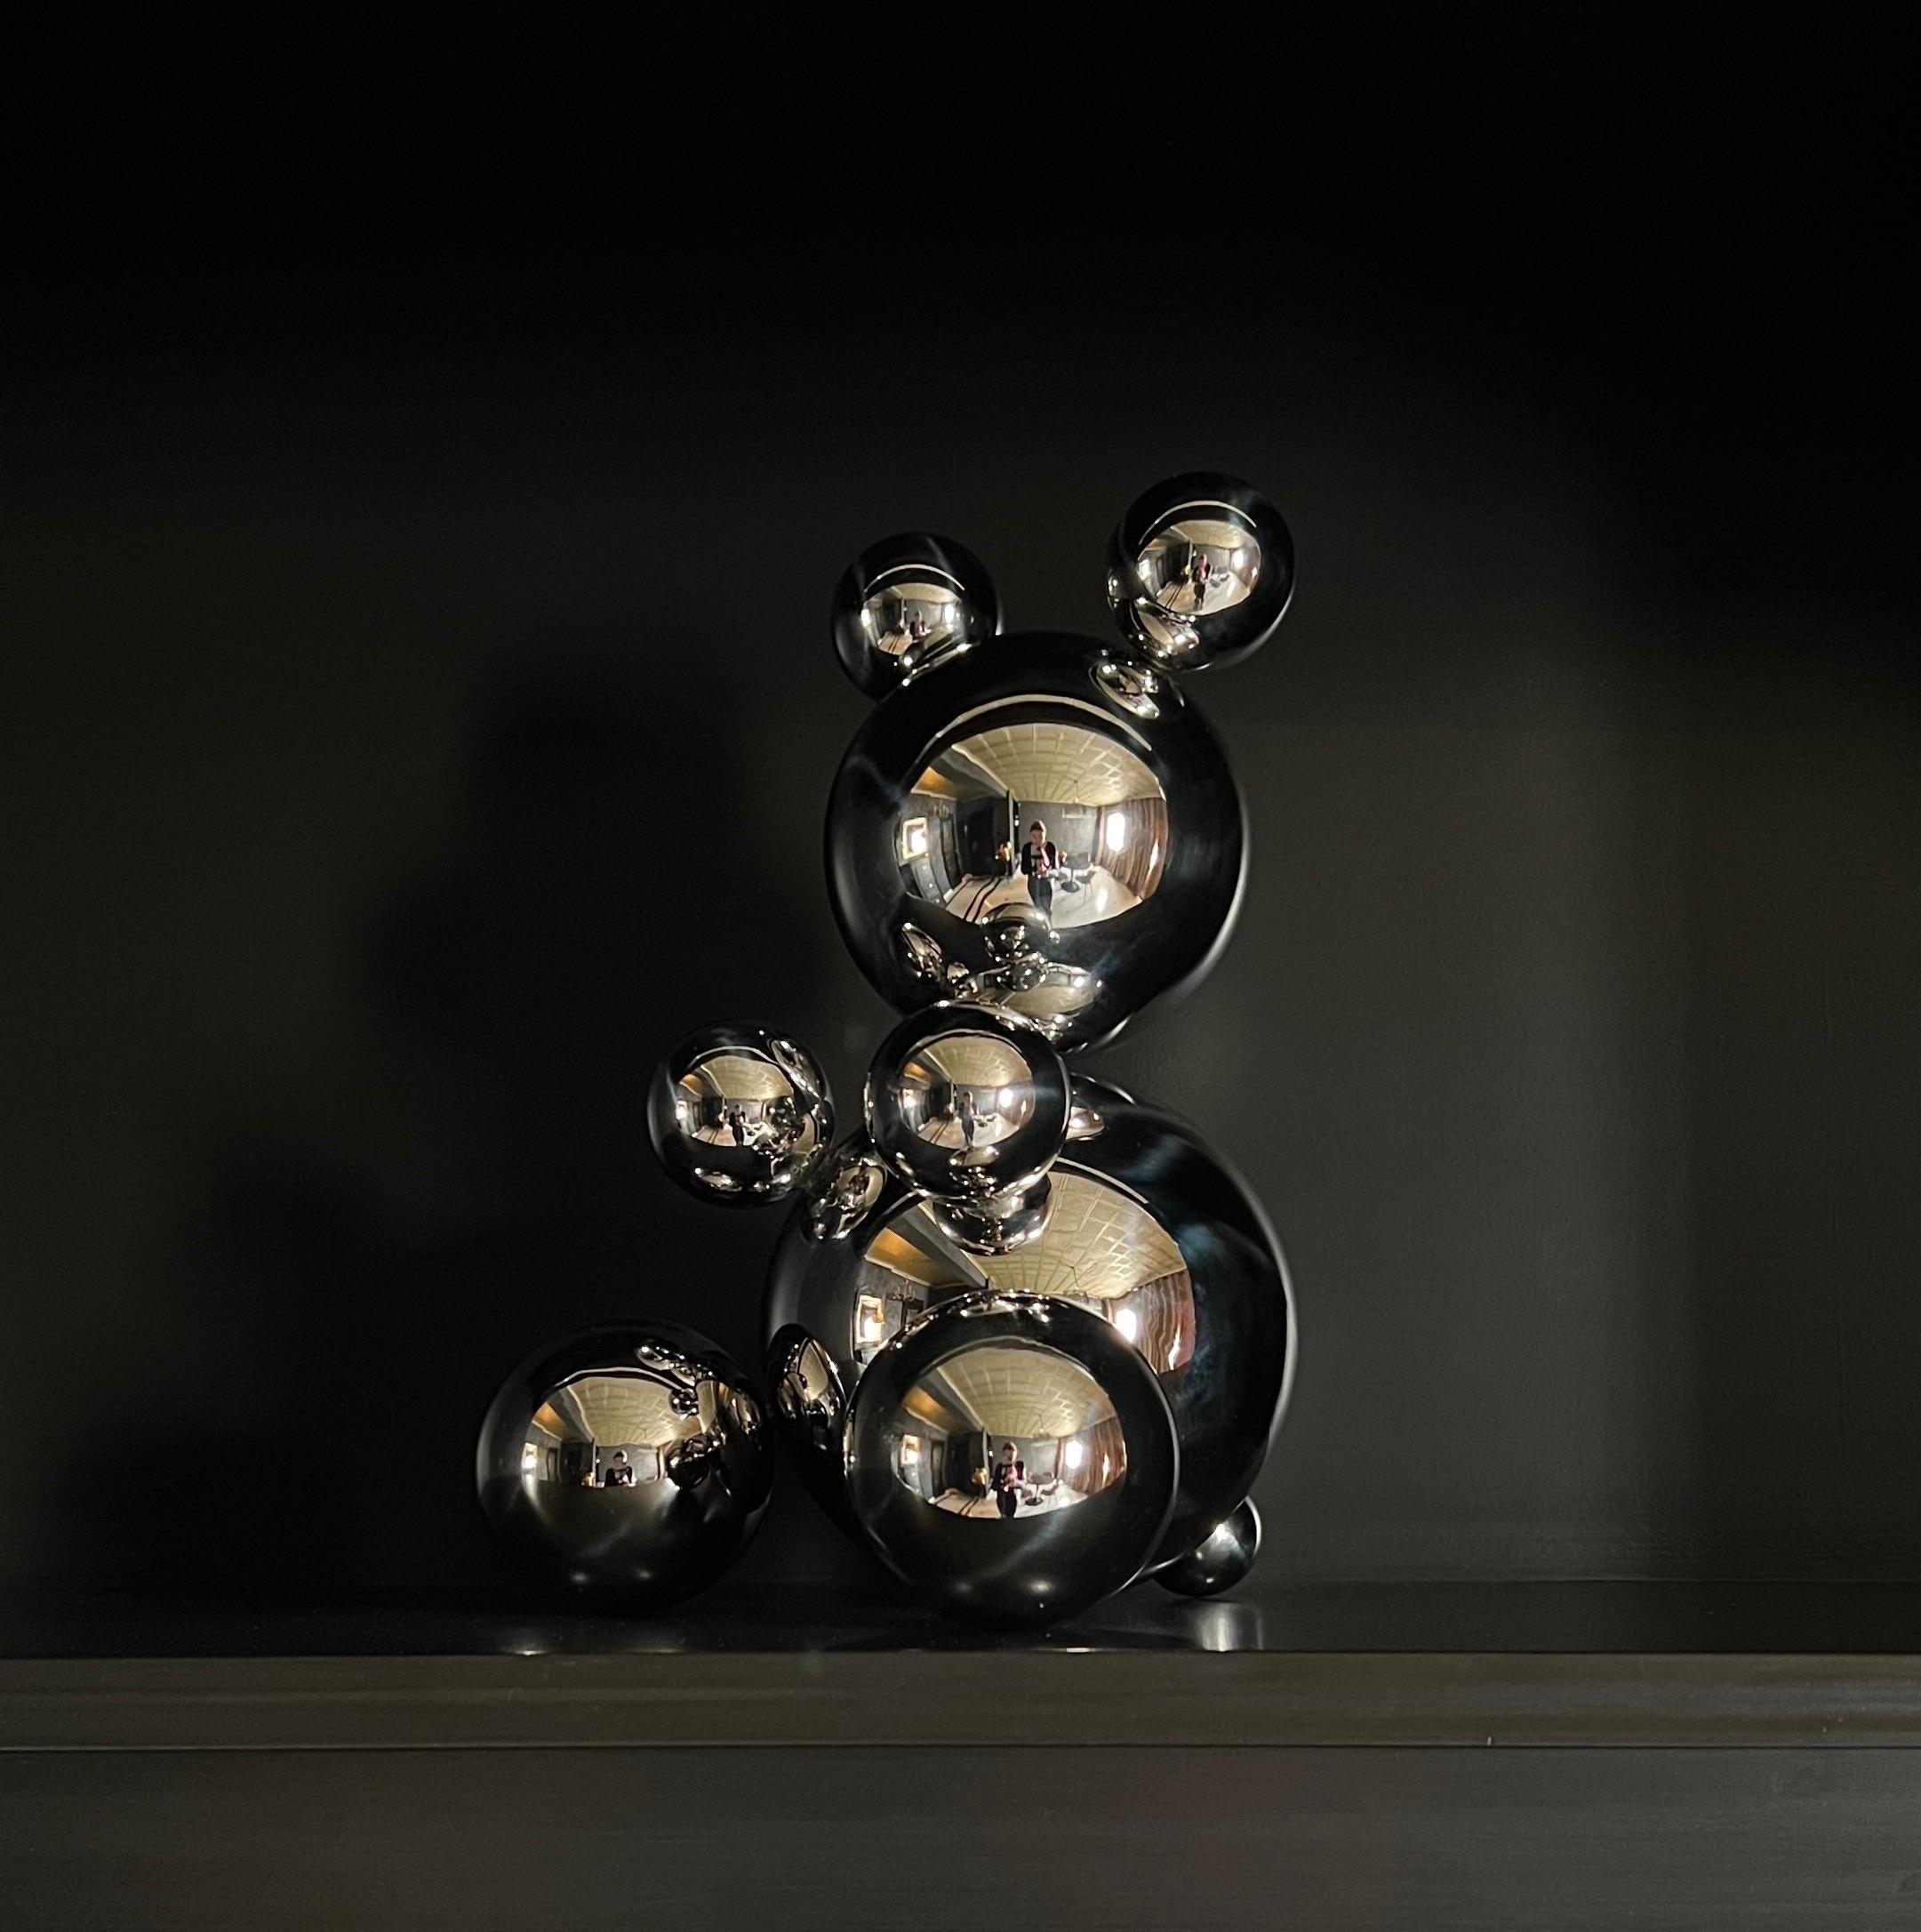 Middle Stainless Steel Bear 'Lucas' Sculpture Minimalistic Animal 3